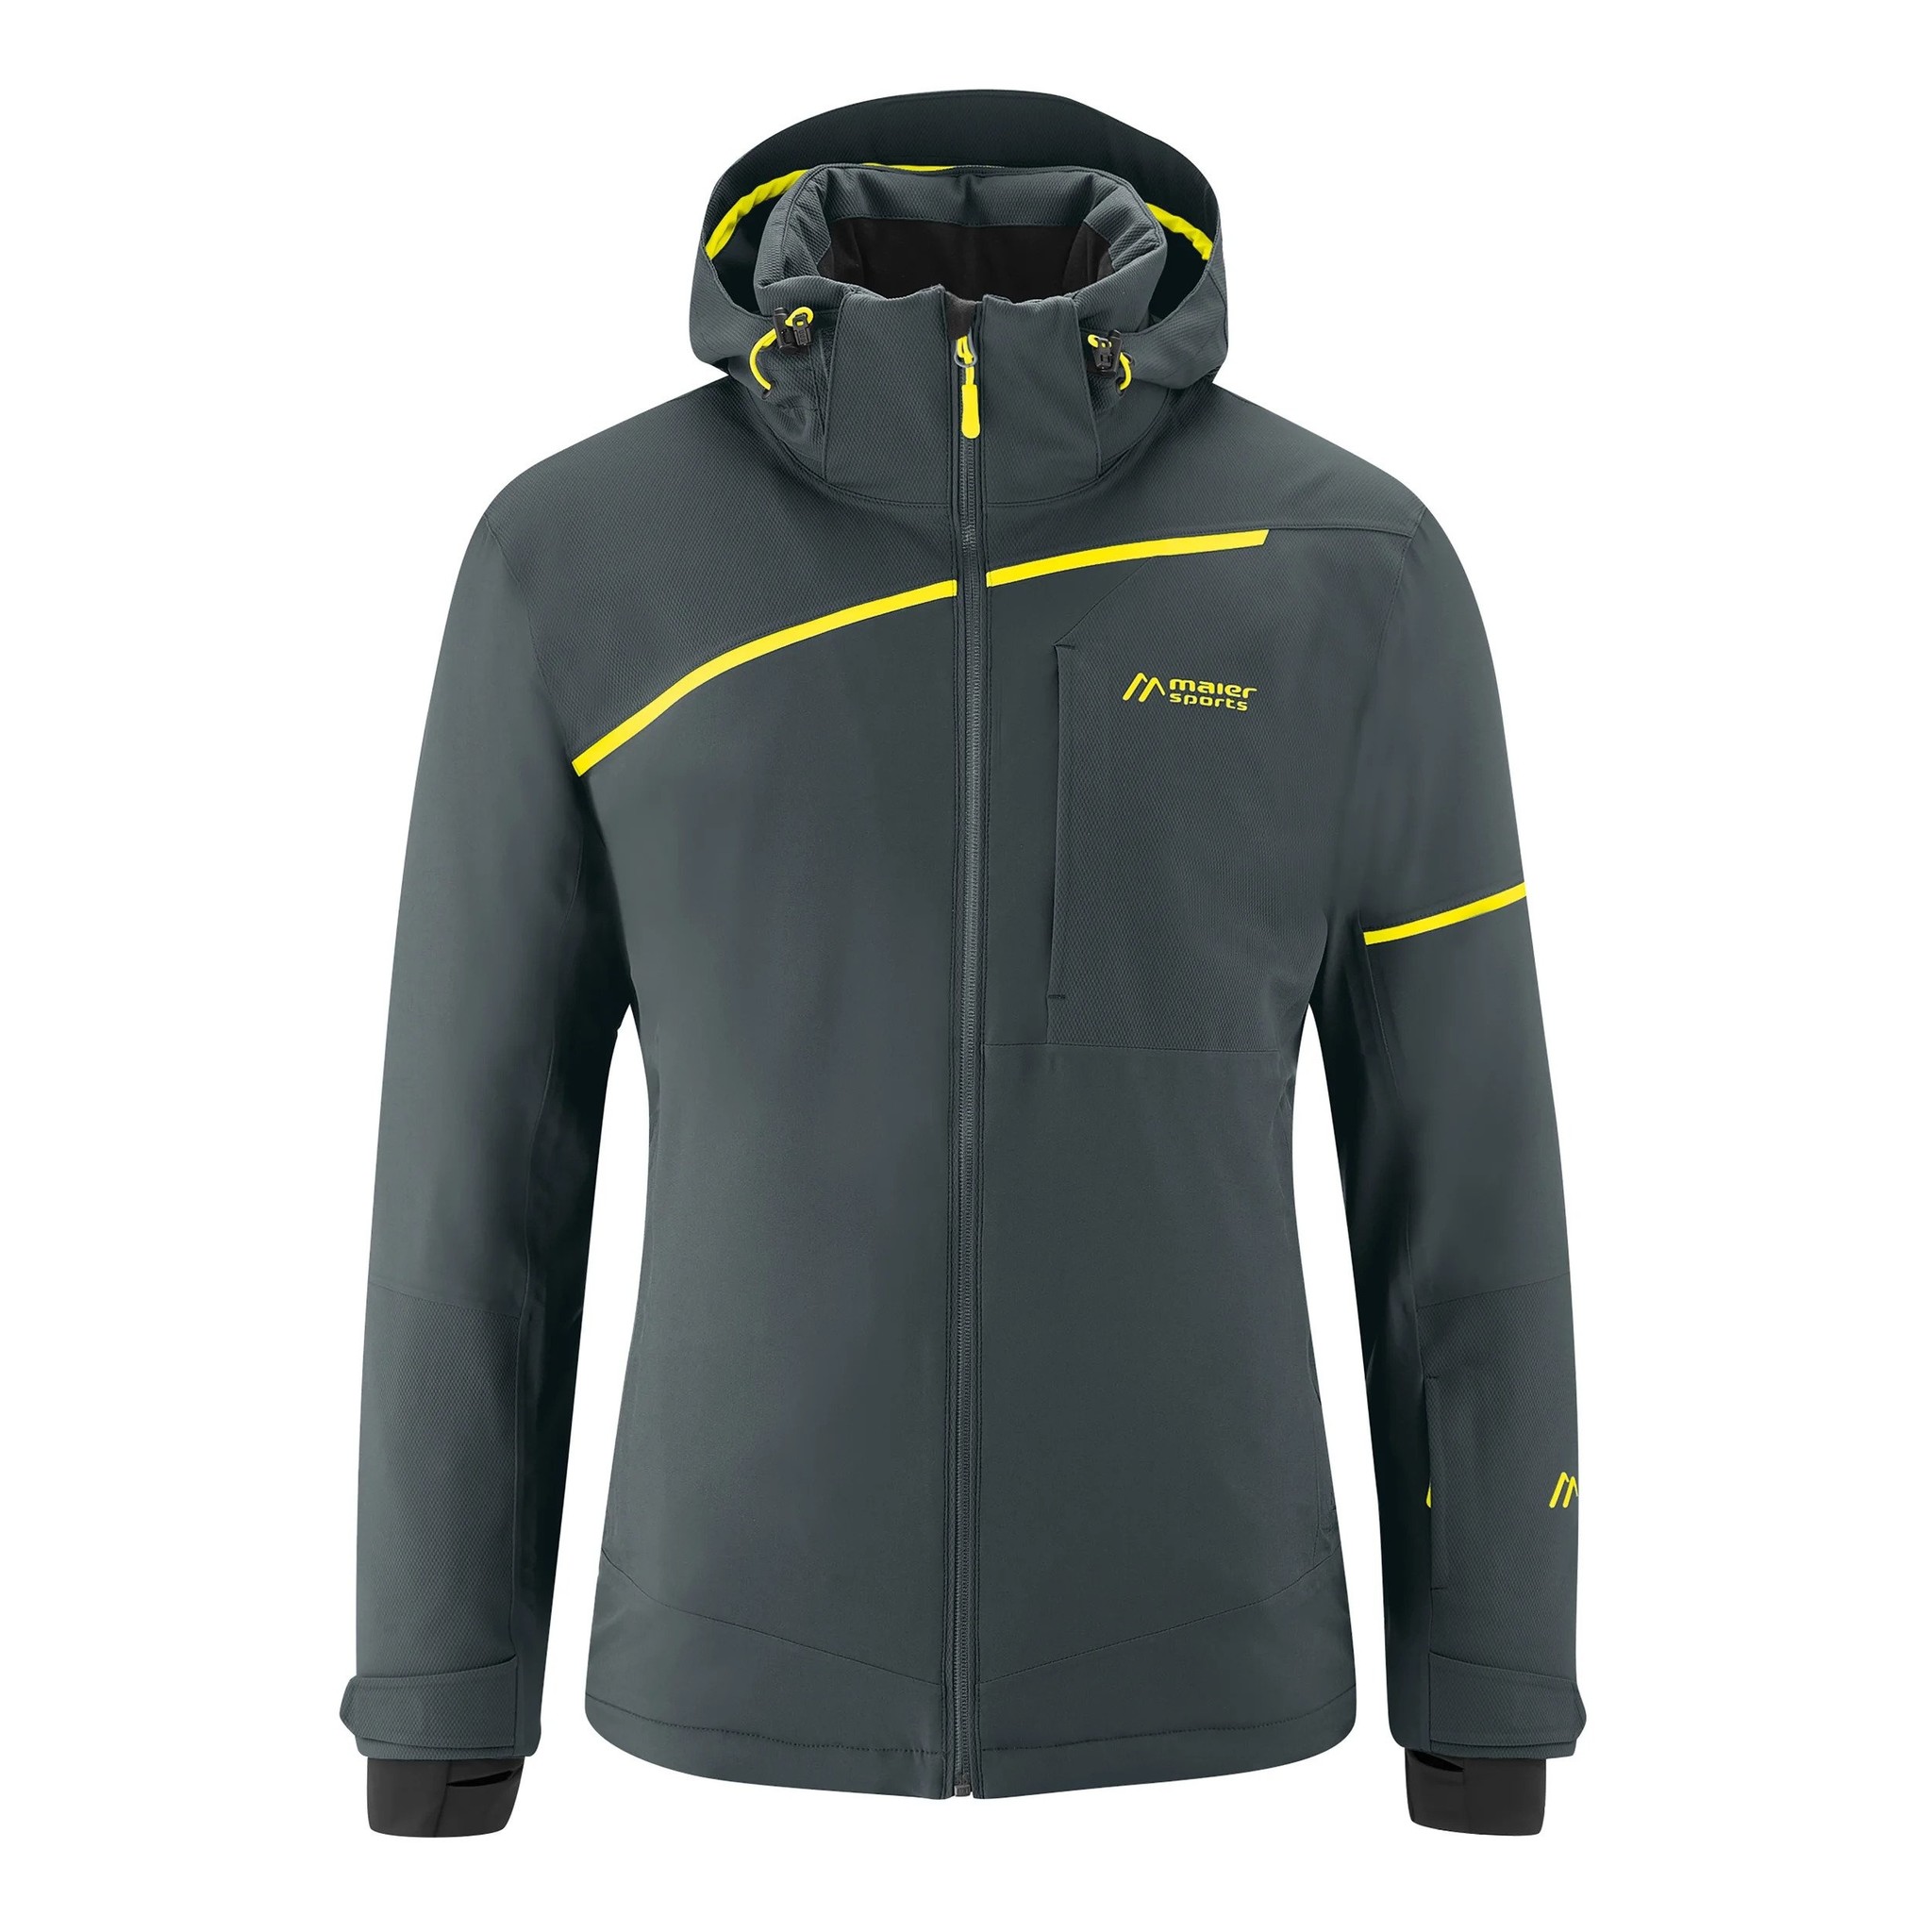 waterval hurken Continentaal Maier Sports Men's Fast Dynamic Jacket – Graphite - Free Style Sport